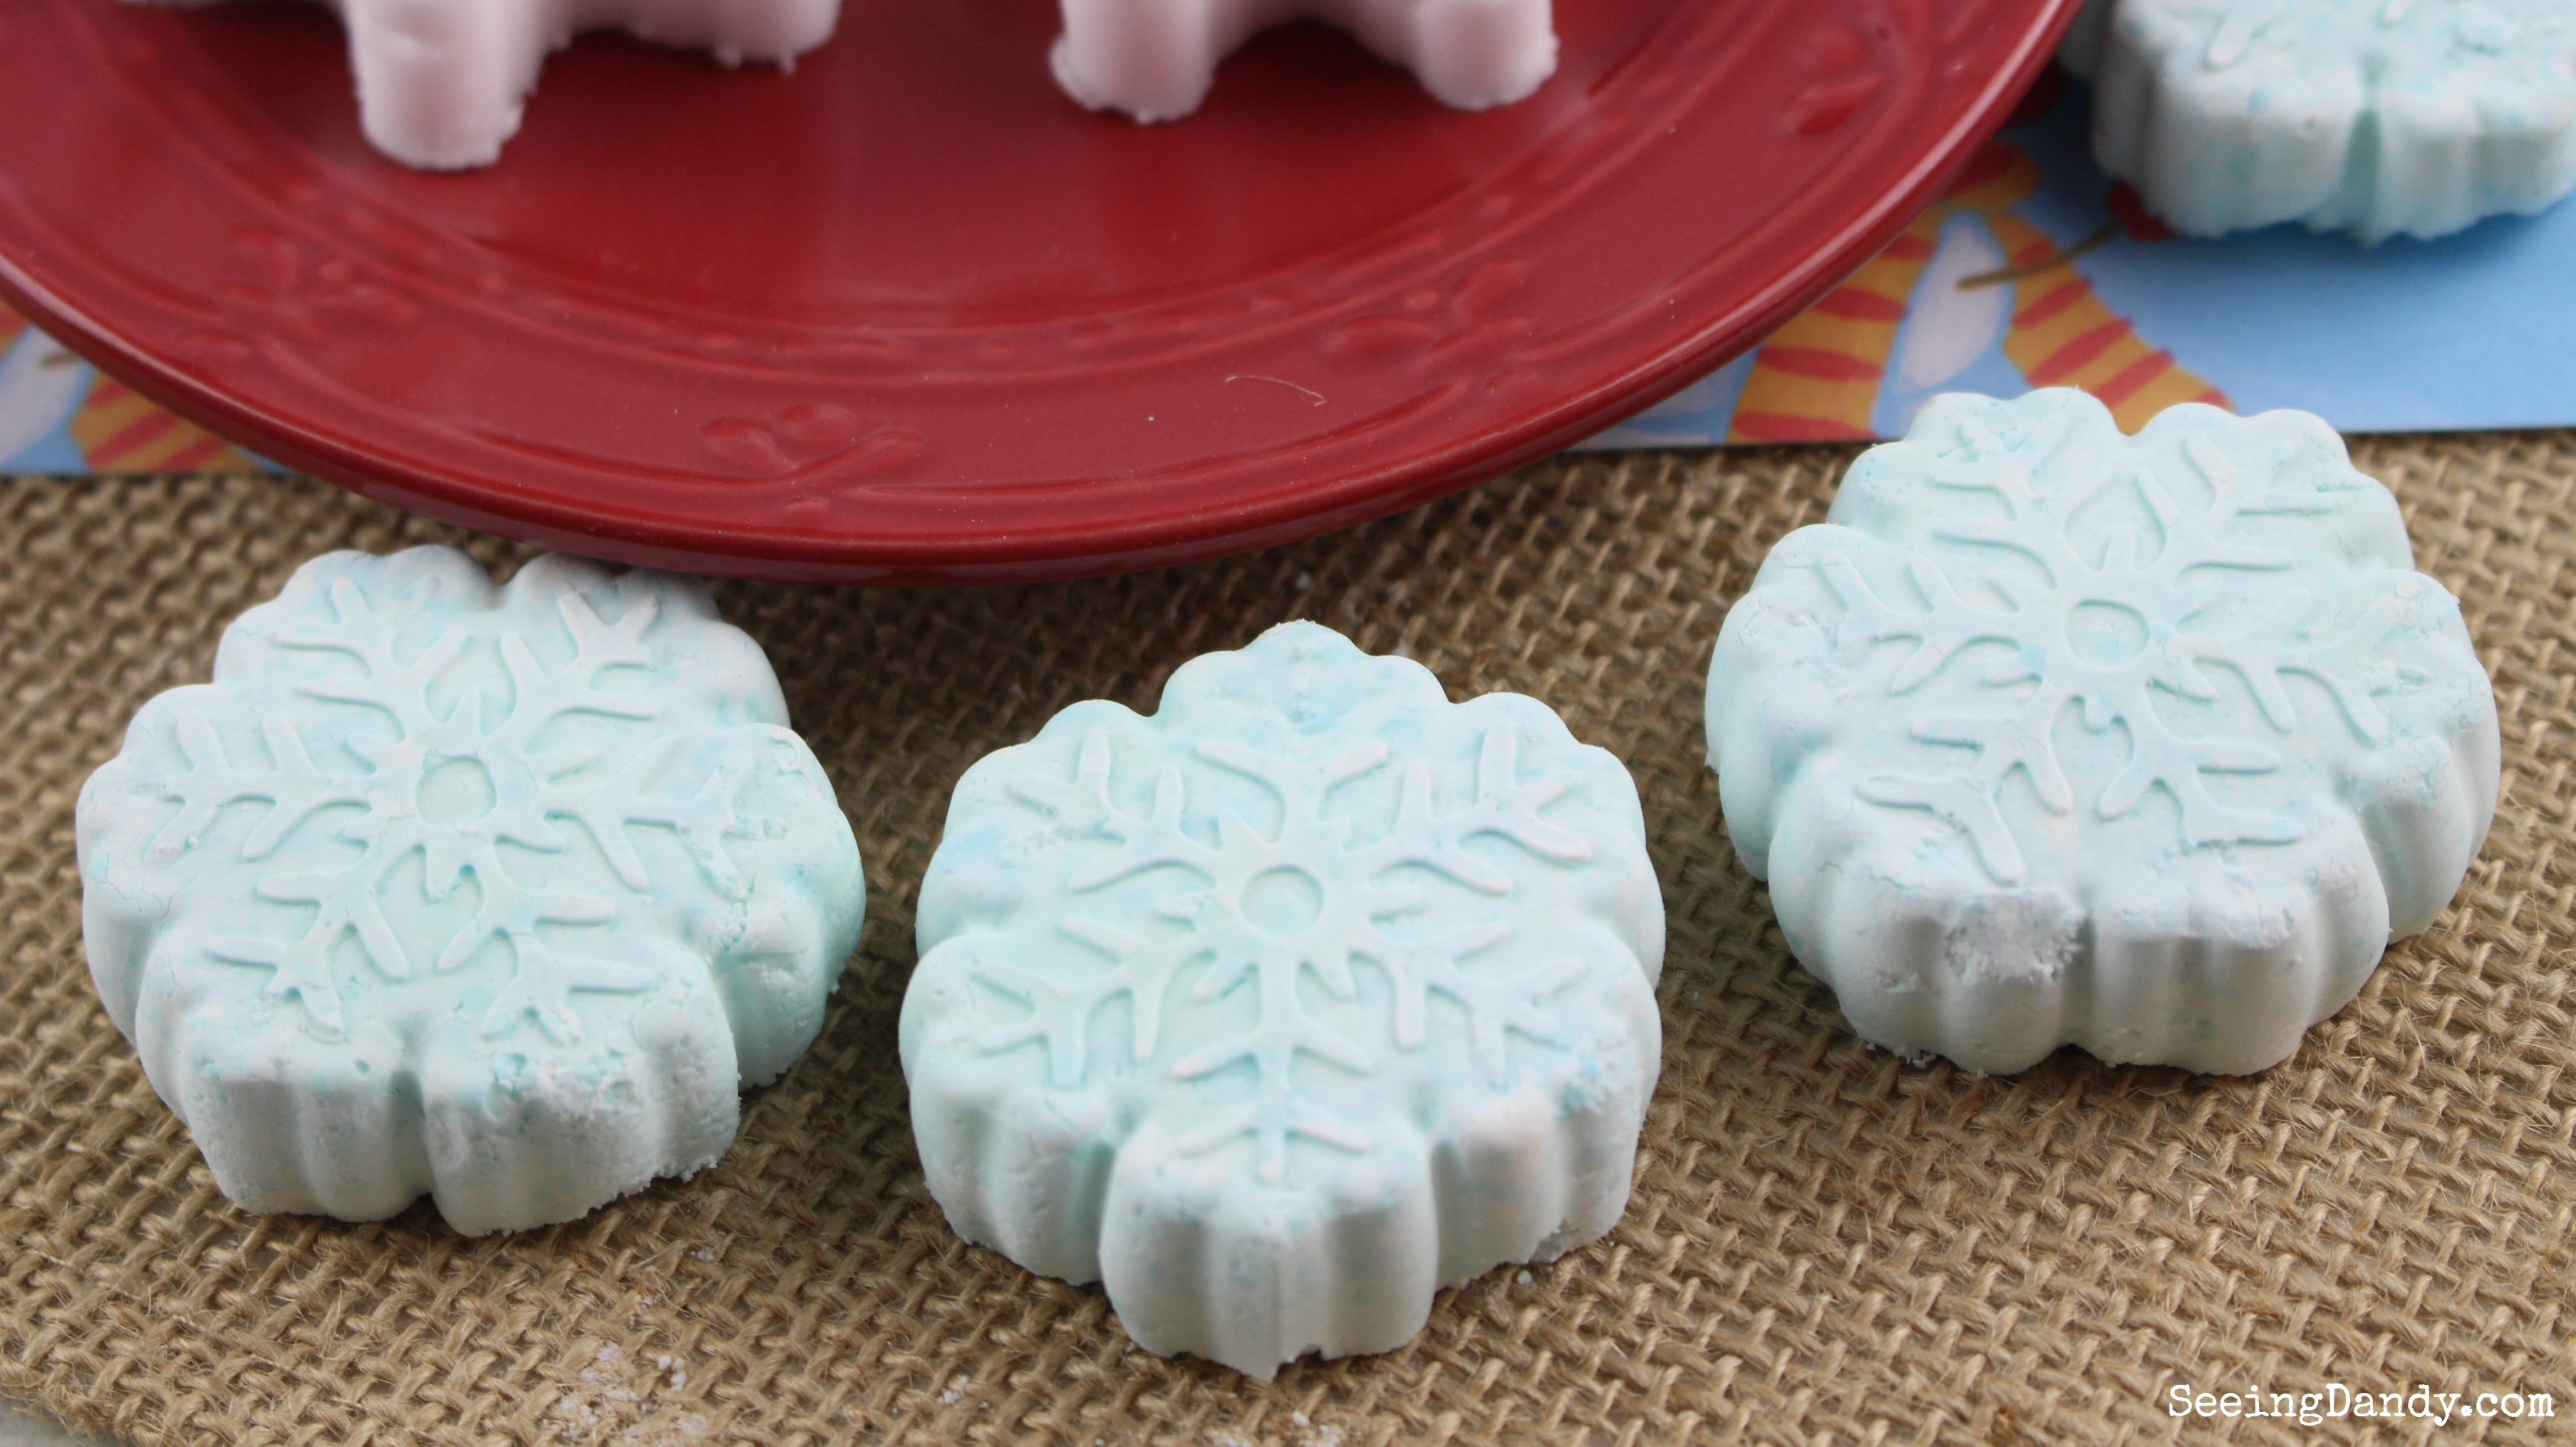 Great gift idea for healthy and beauty. Snowflake peppermint shower steamers on red plate and burlap.